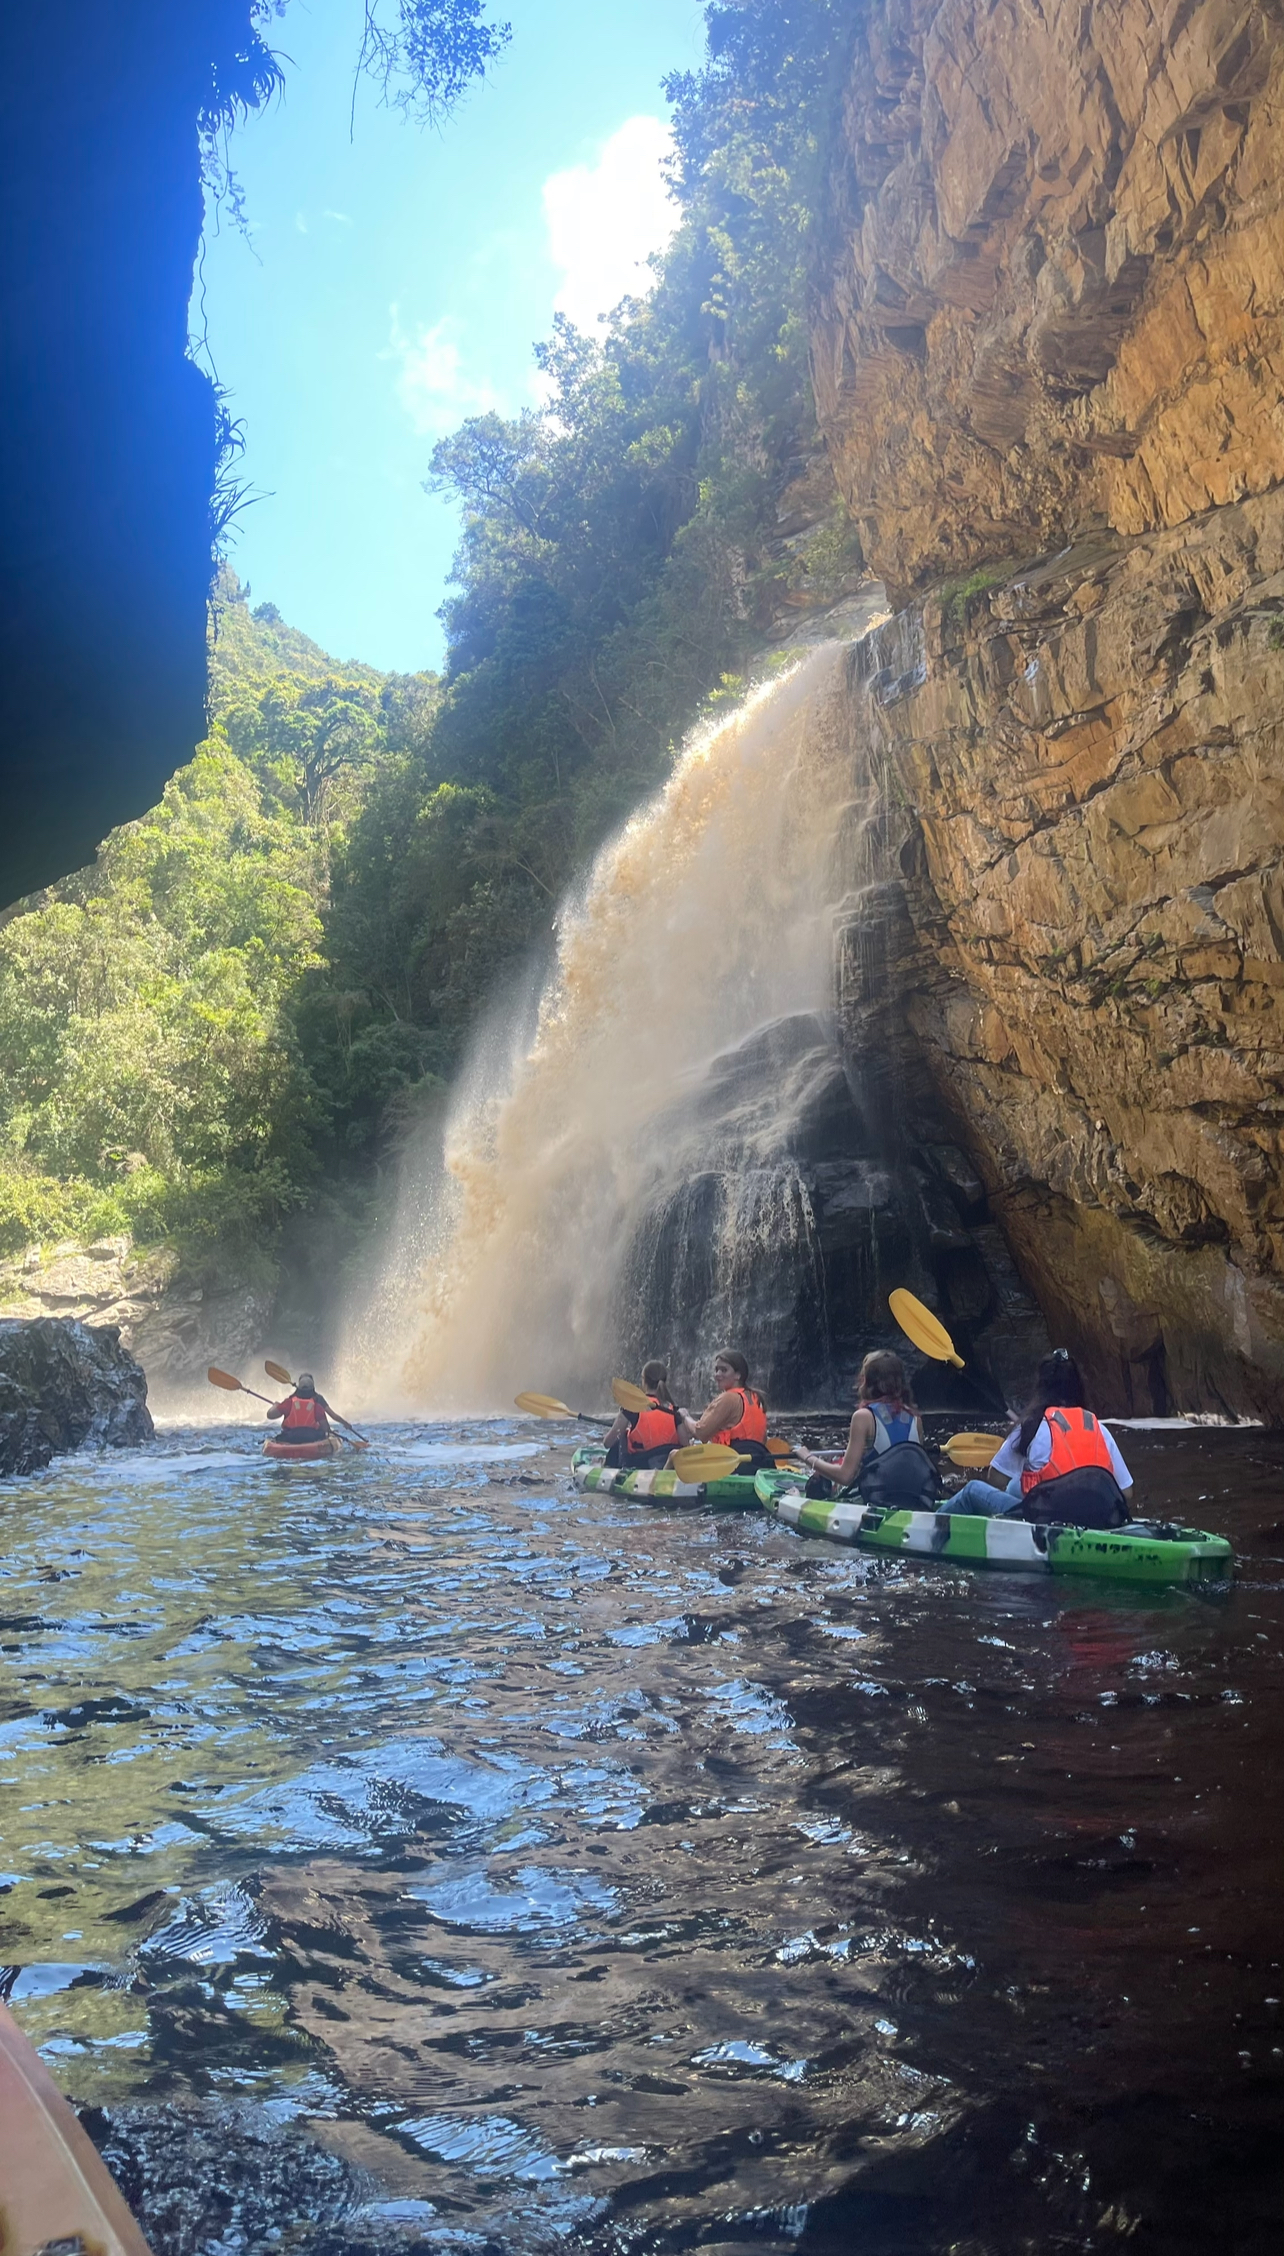 Kayaking in a waterfall with some of the other volunteers/friends I made!